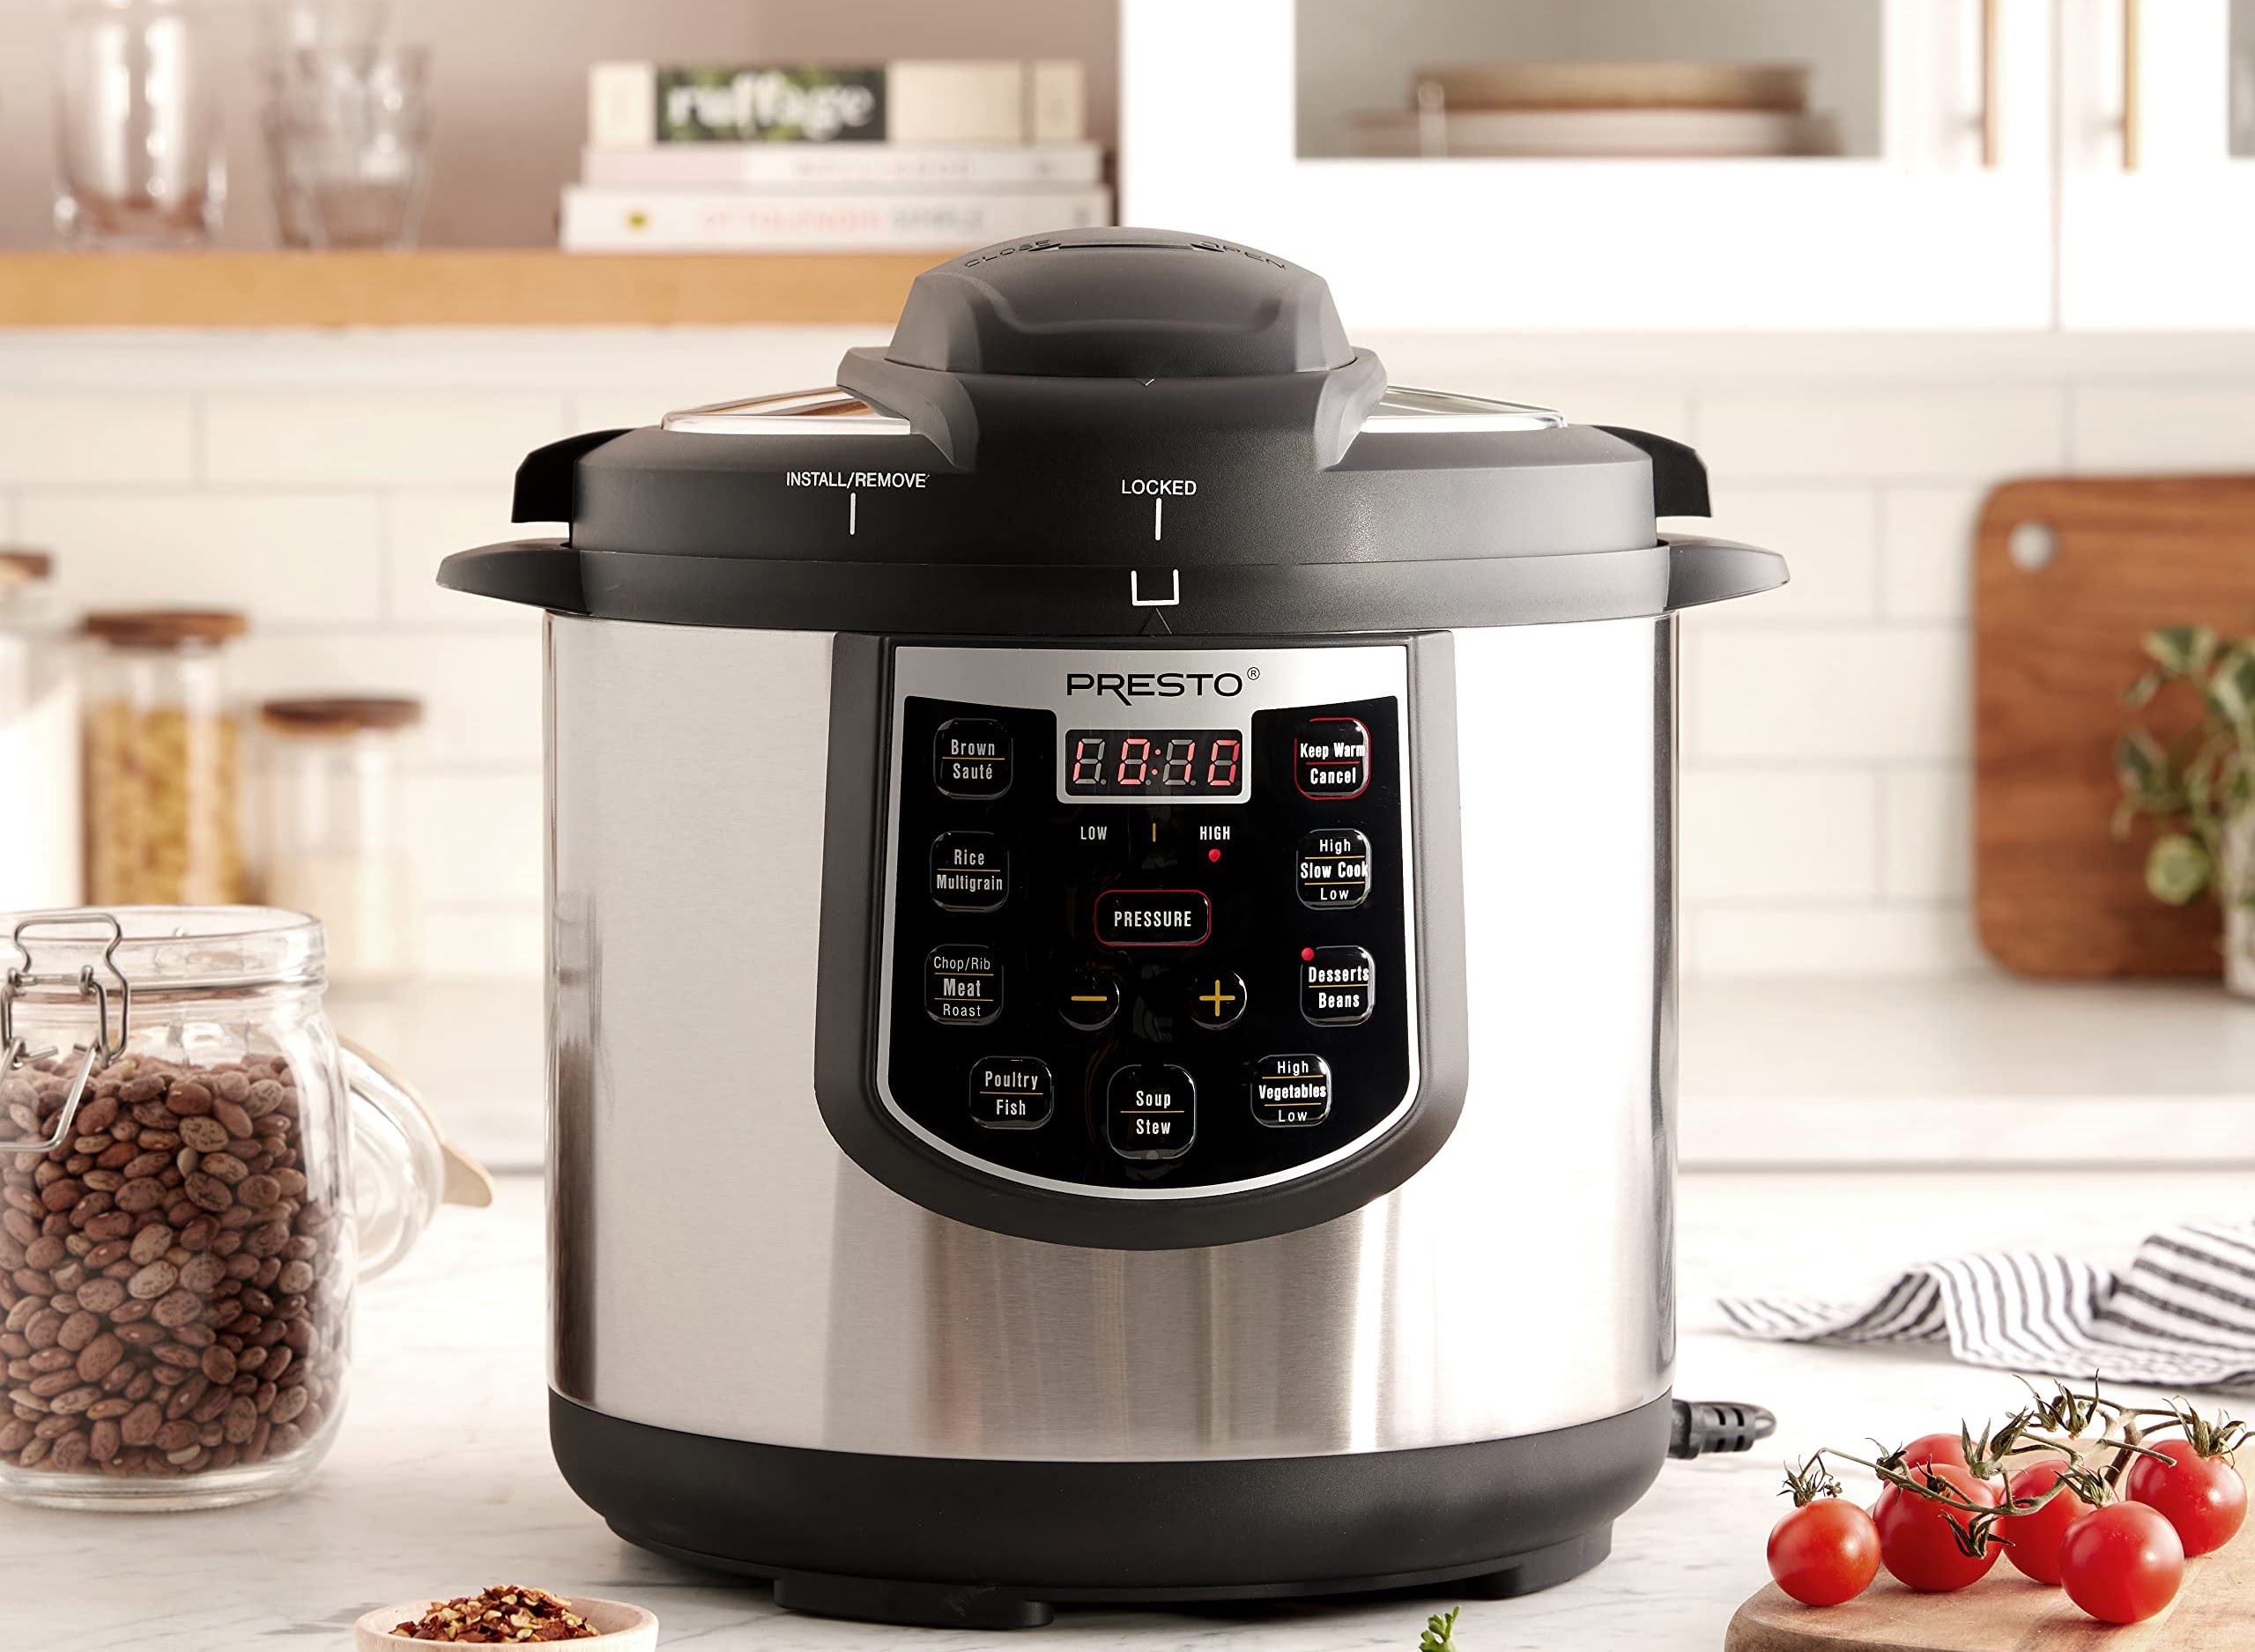 How To Sauté Meals On A Presto Electric Pressure Cooker